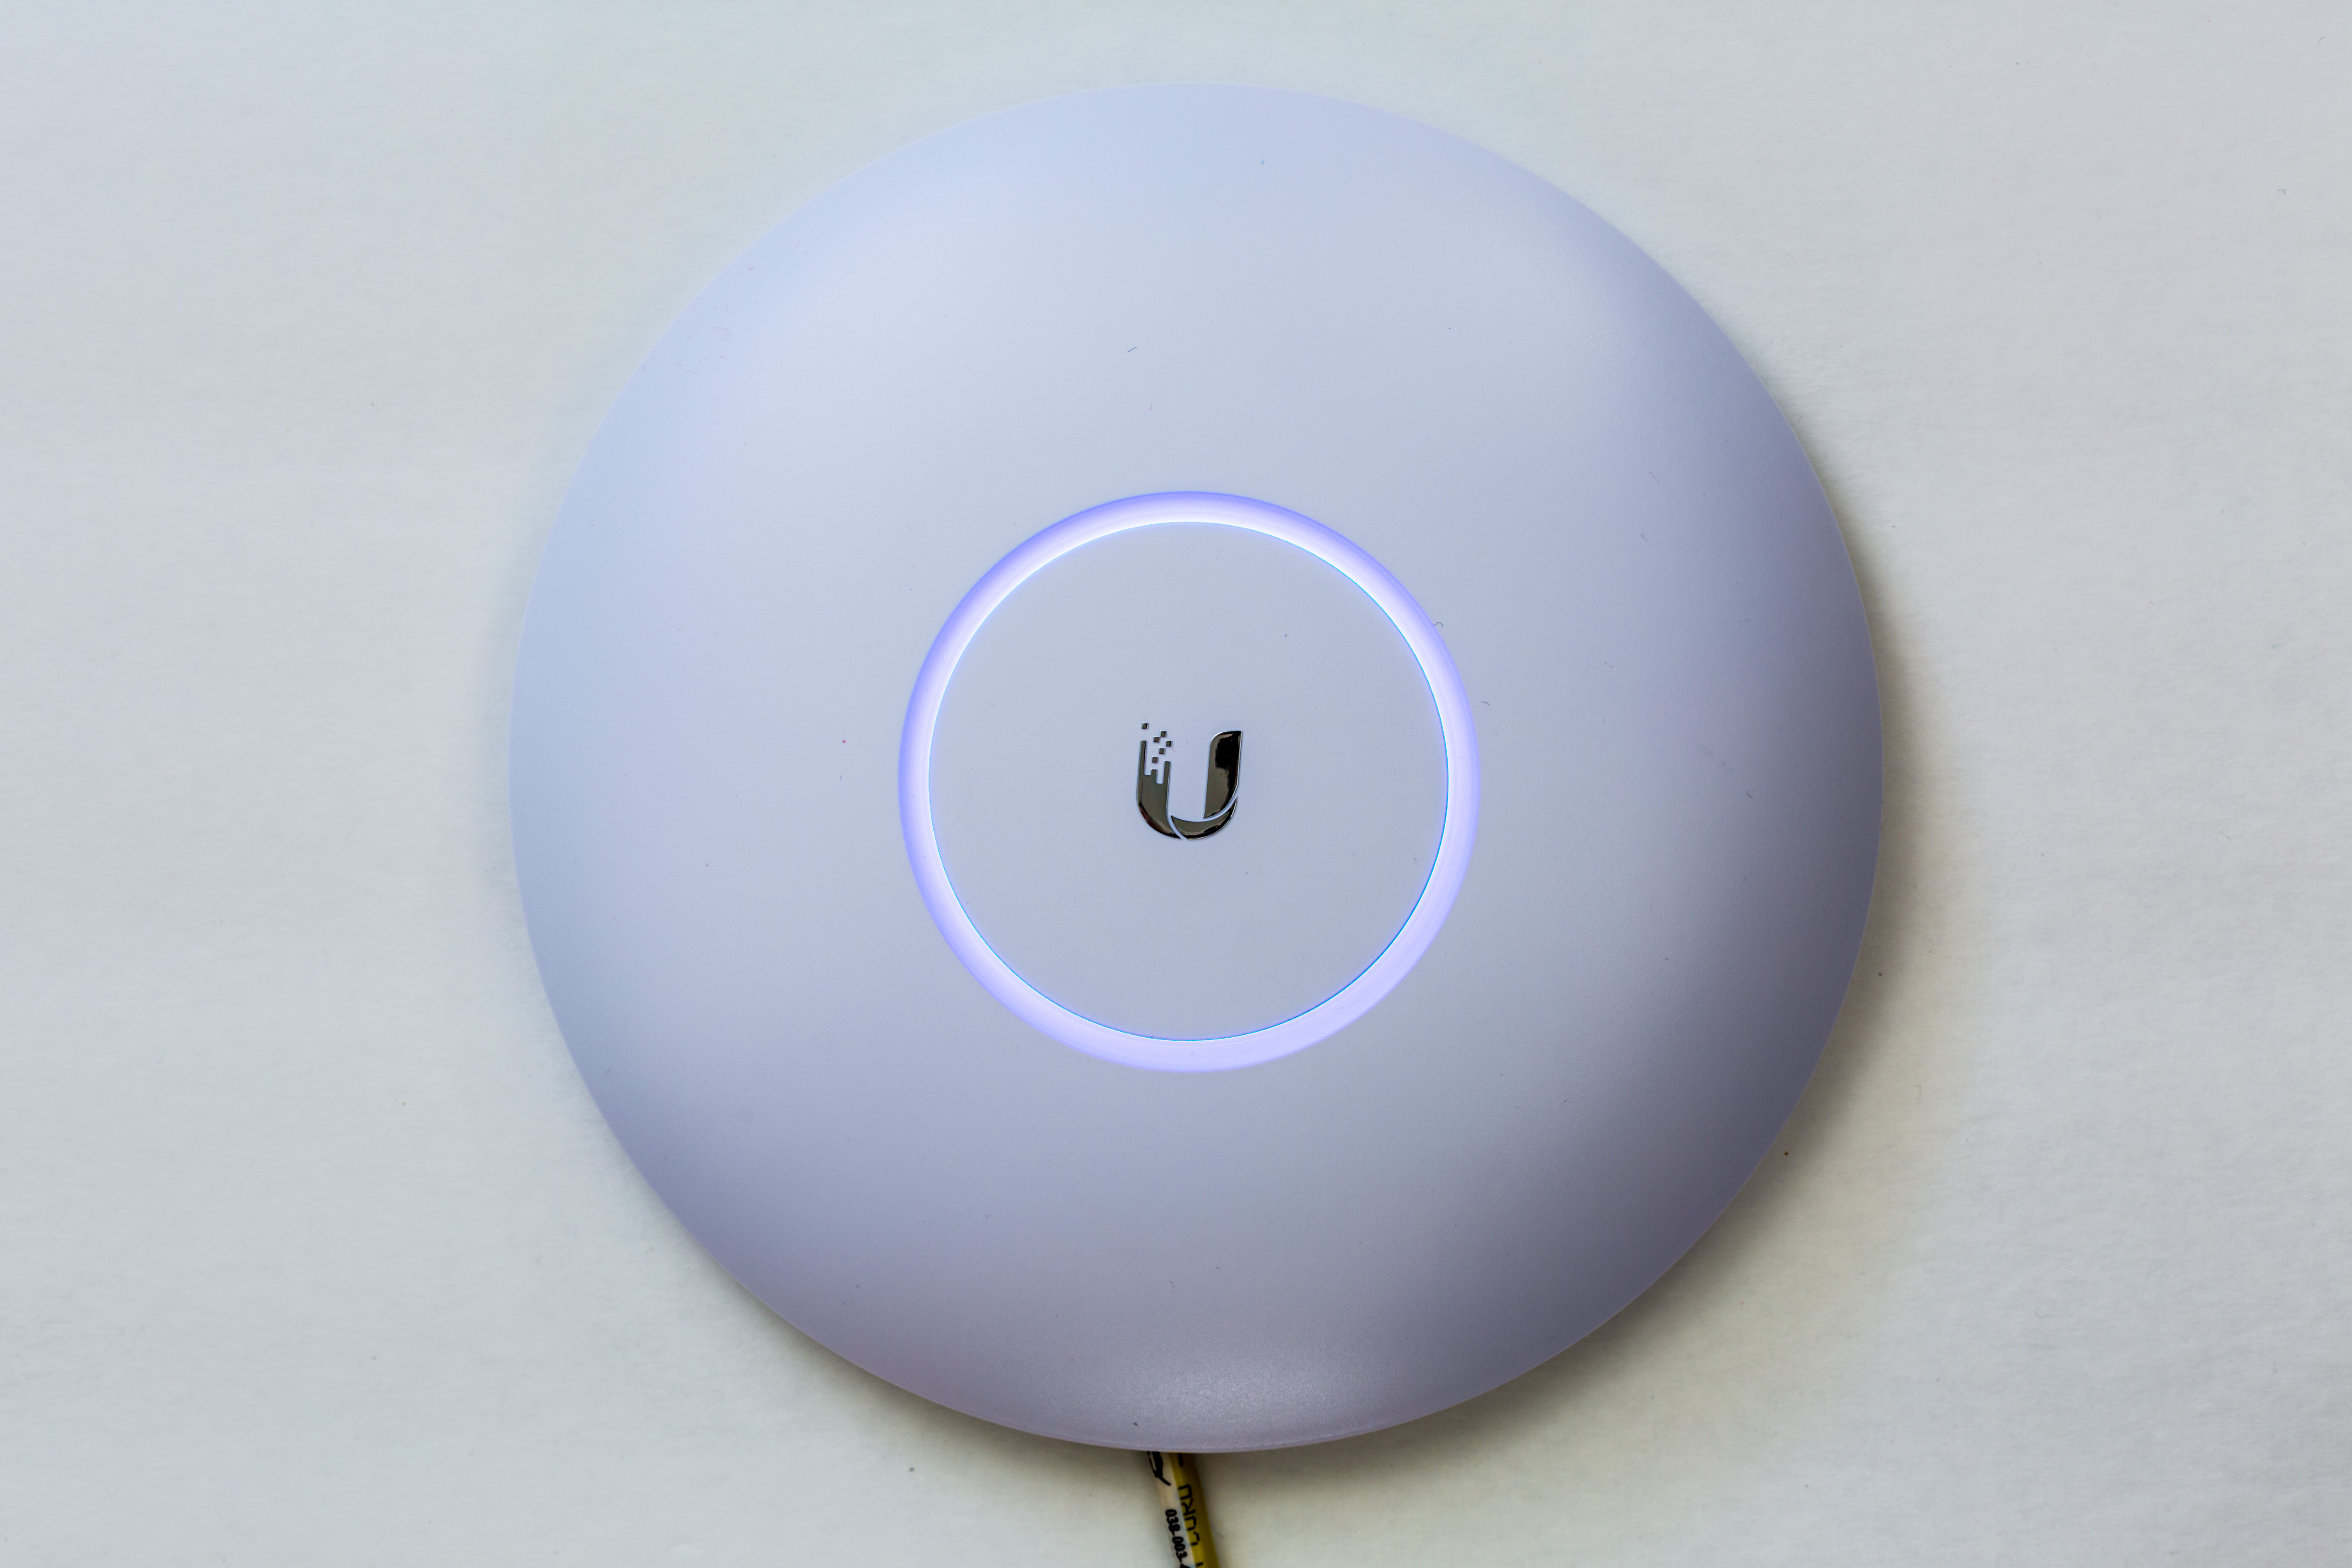 Review: Ubiquiti UniFi made realize how terrible Wi-Fi gear is | Ars Technica